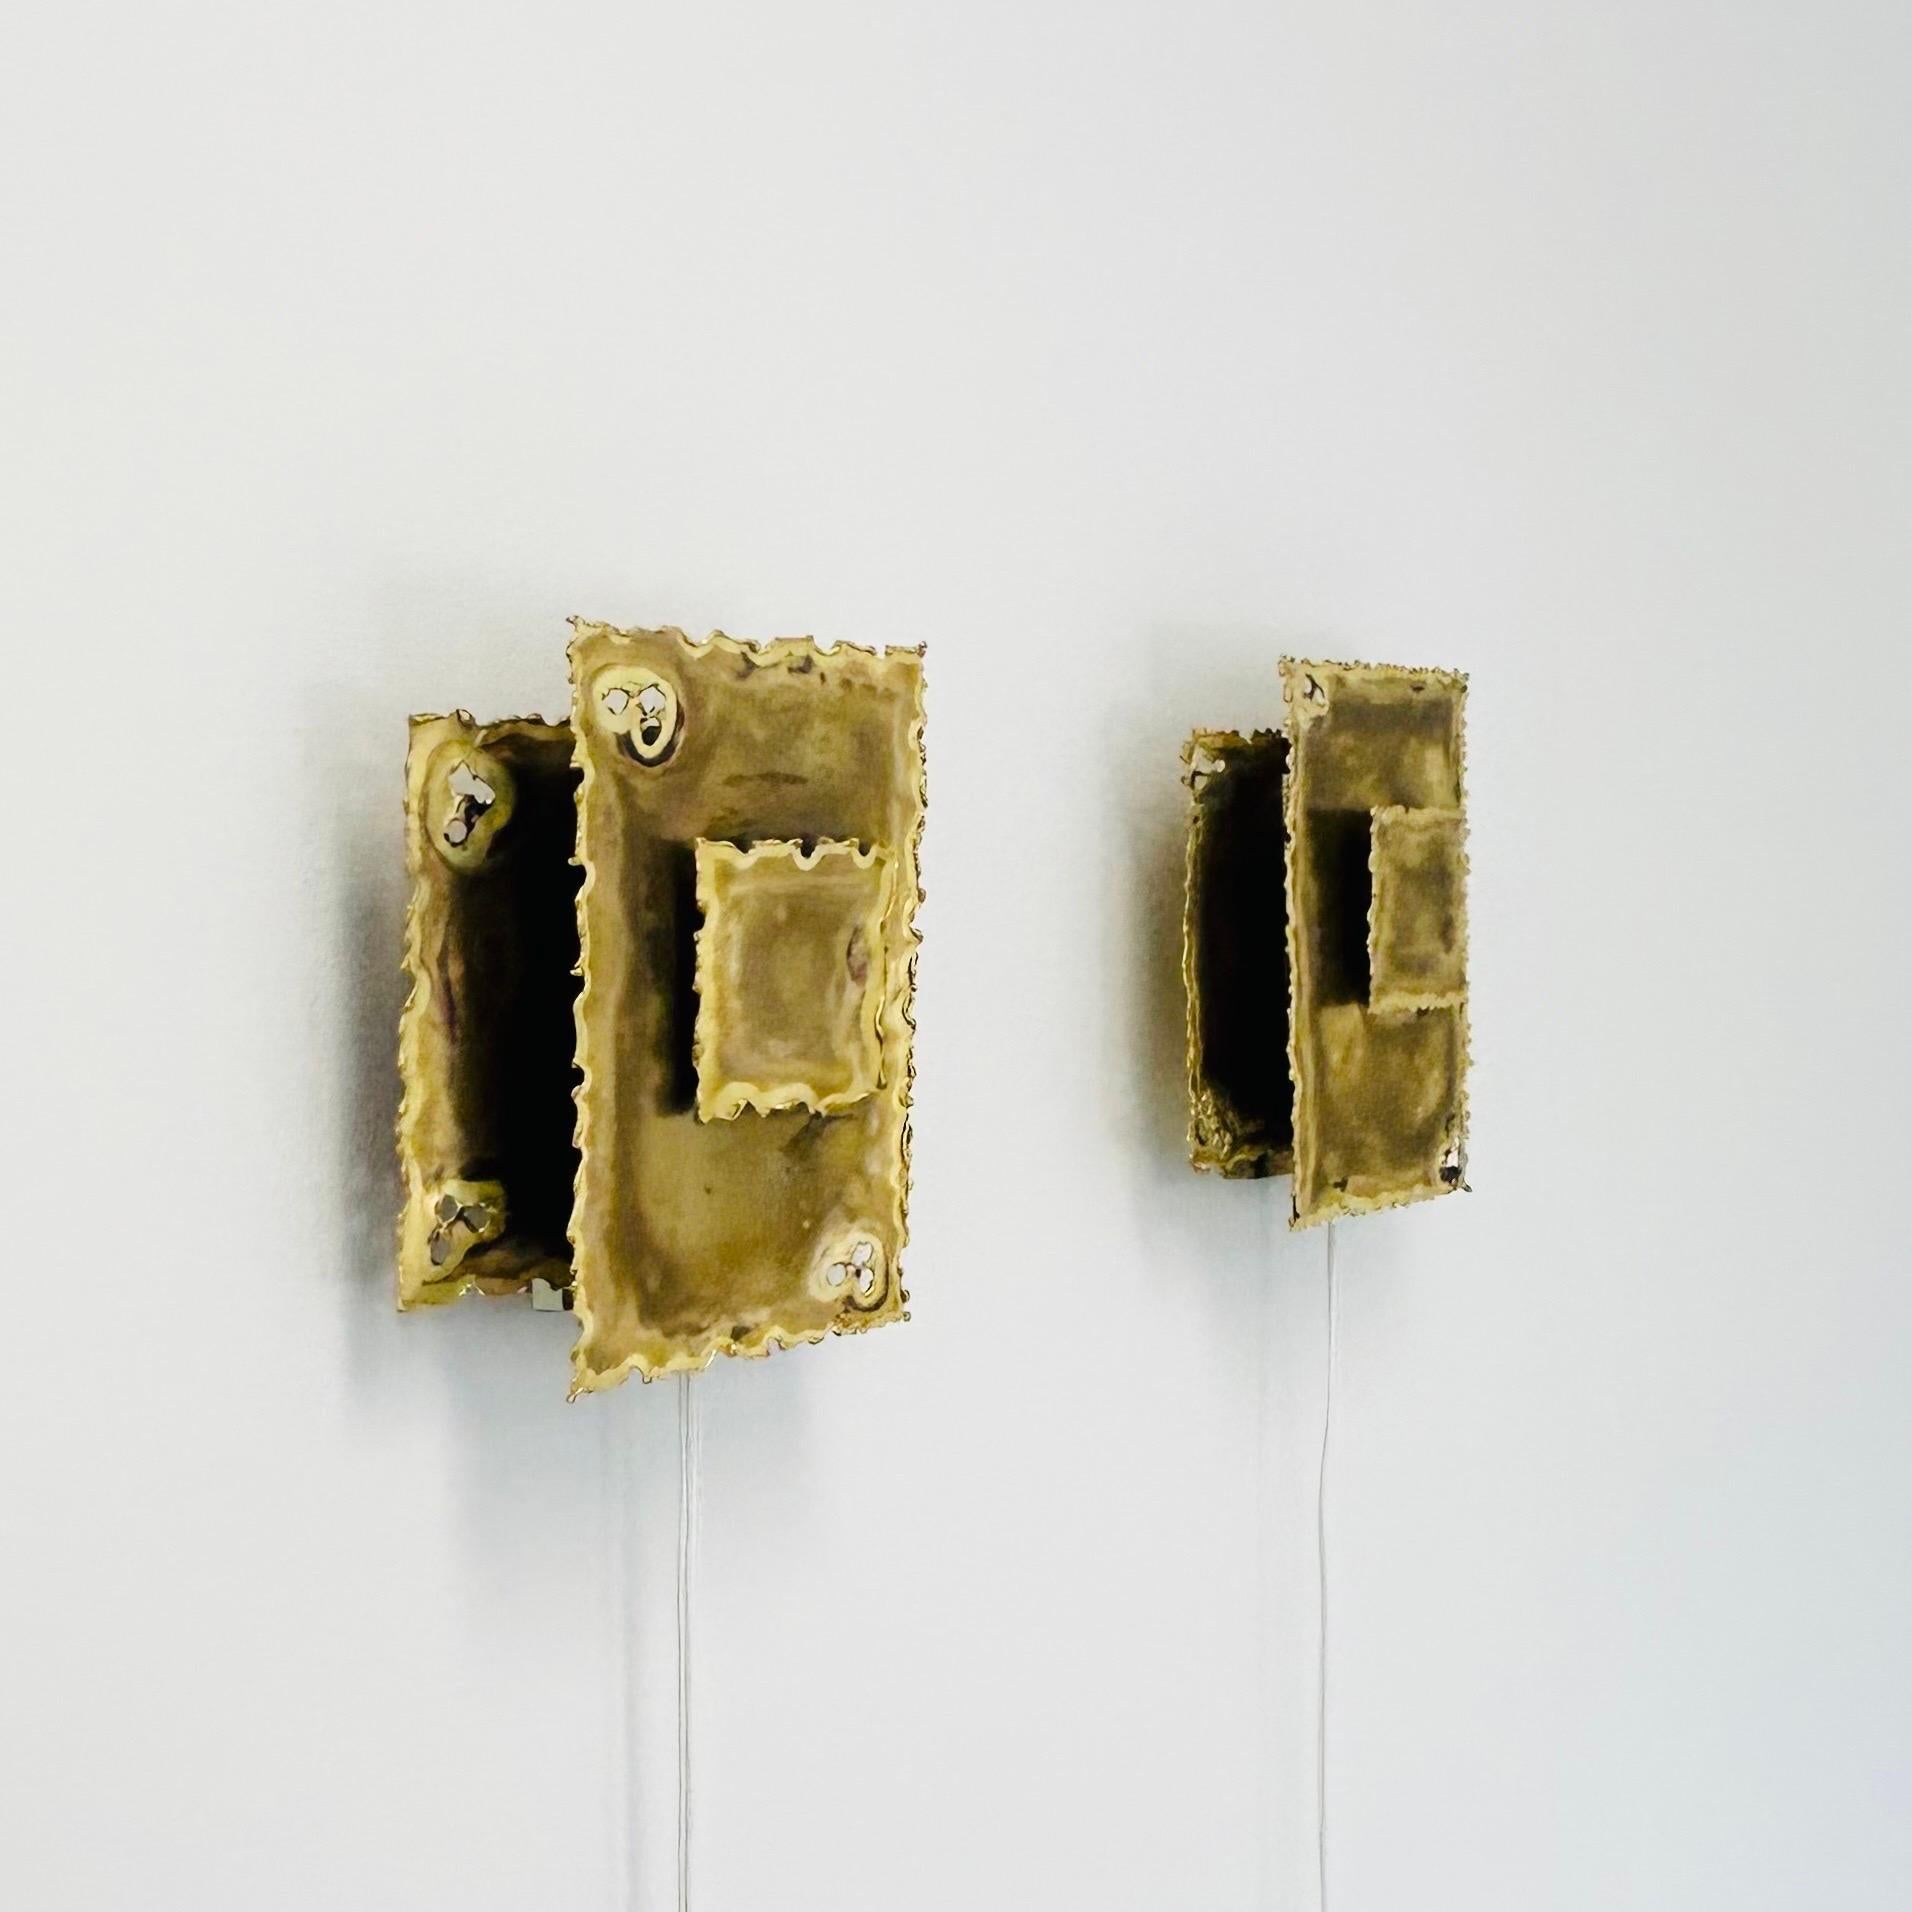 Danish Pair of Square Brass Wall Lamps by Svend Aage Holm Sorensen, 1960s, Denmark